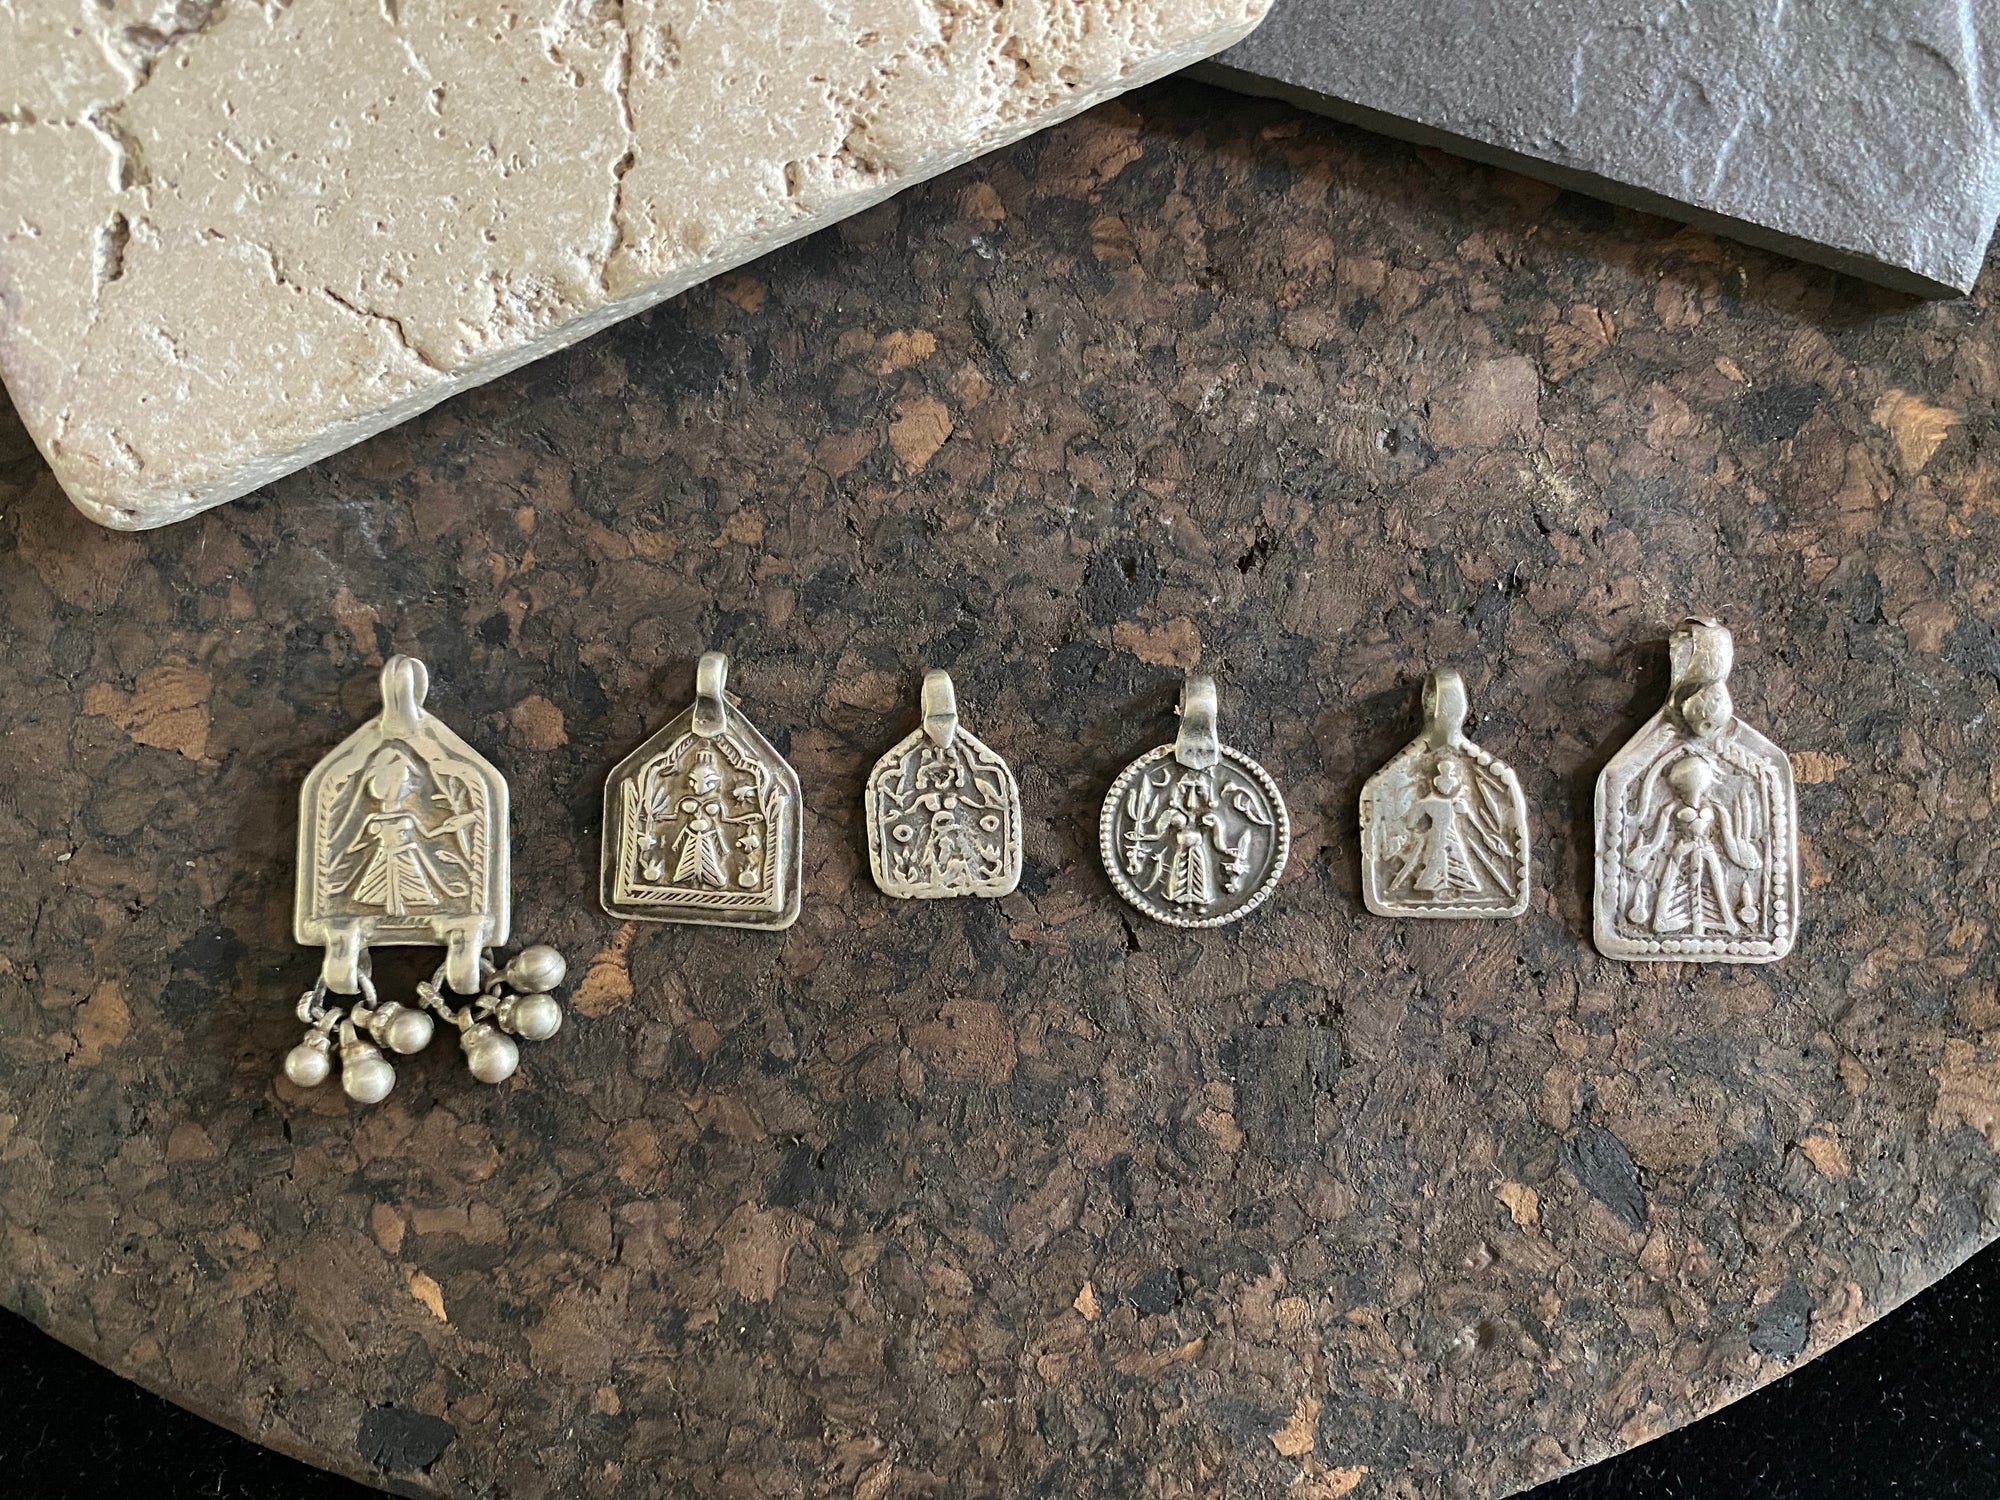 Antique silver amulets represent the Hindu goddess Kansari, goddess of the harvest and of fertility. These small pendants are traditionally worn for good luck, to increase fertility and to bring all good things to you and your home. These pendants date from the early 19th - early 20th century.  Measurements: all vary between 1.4 and 1.8 cm in width